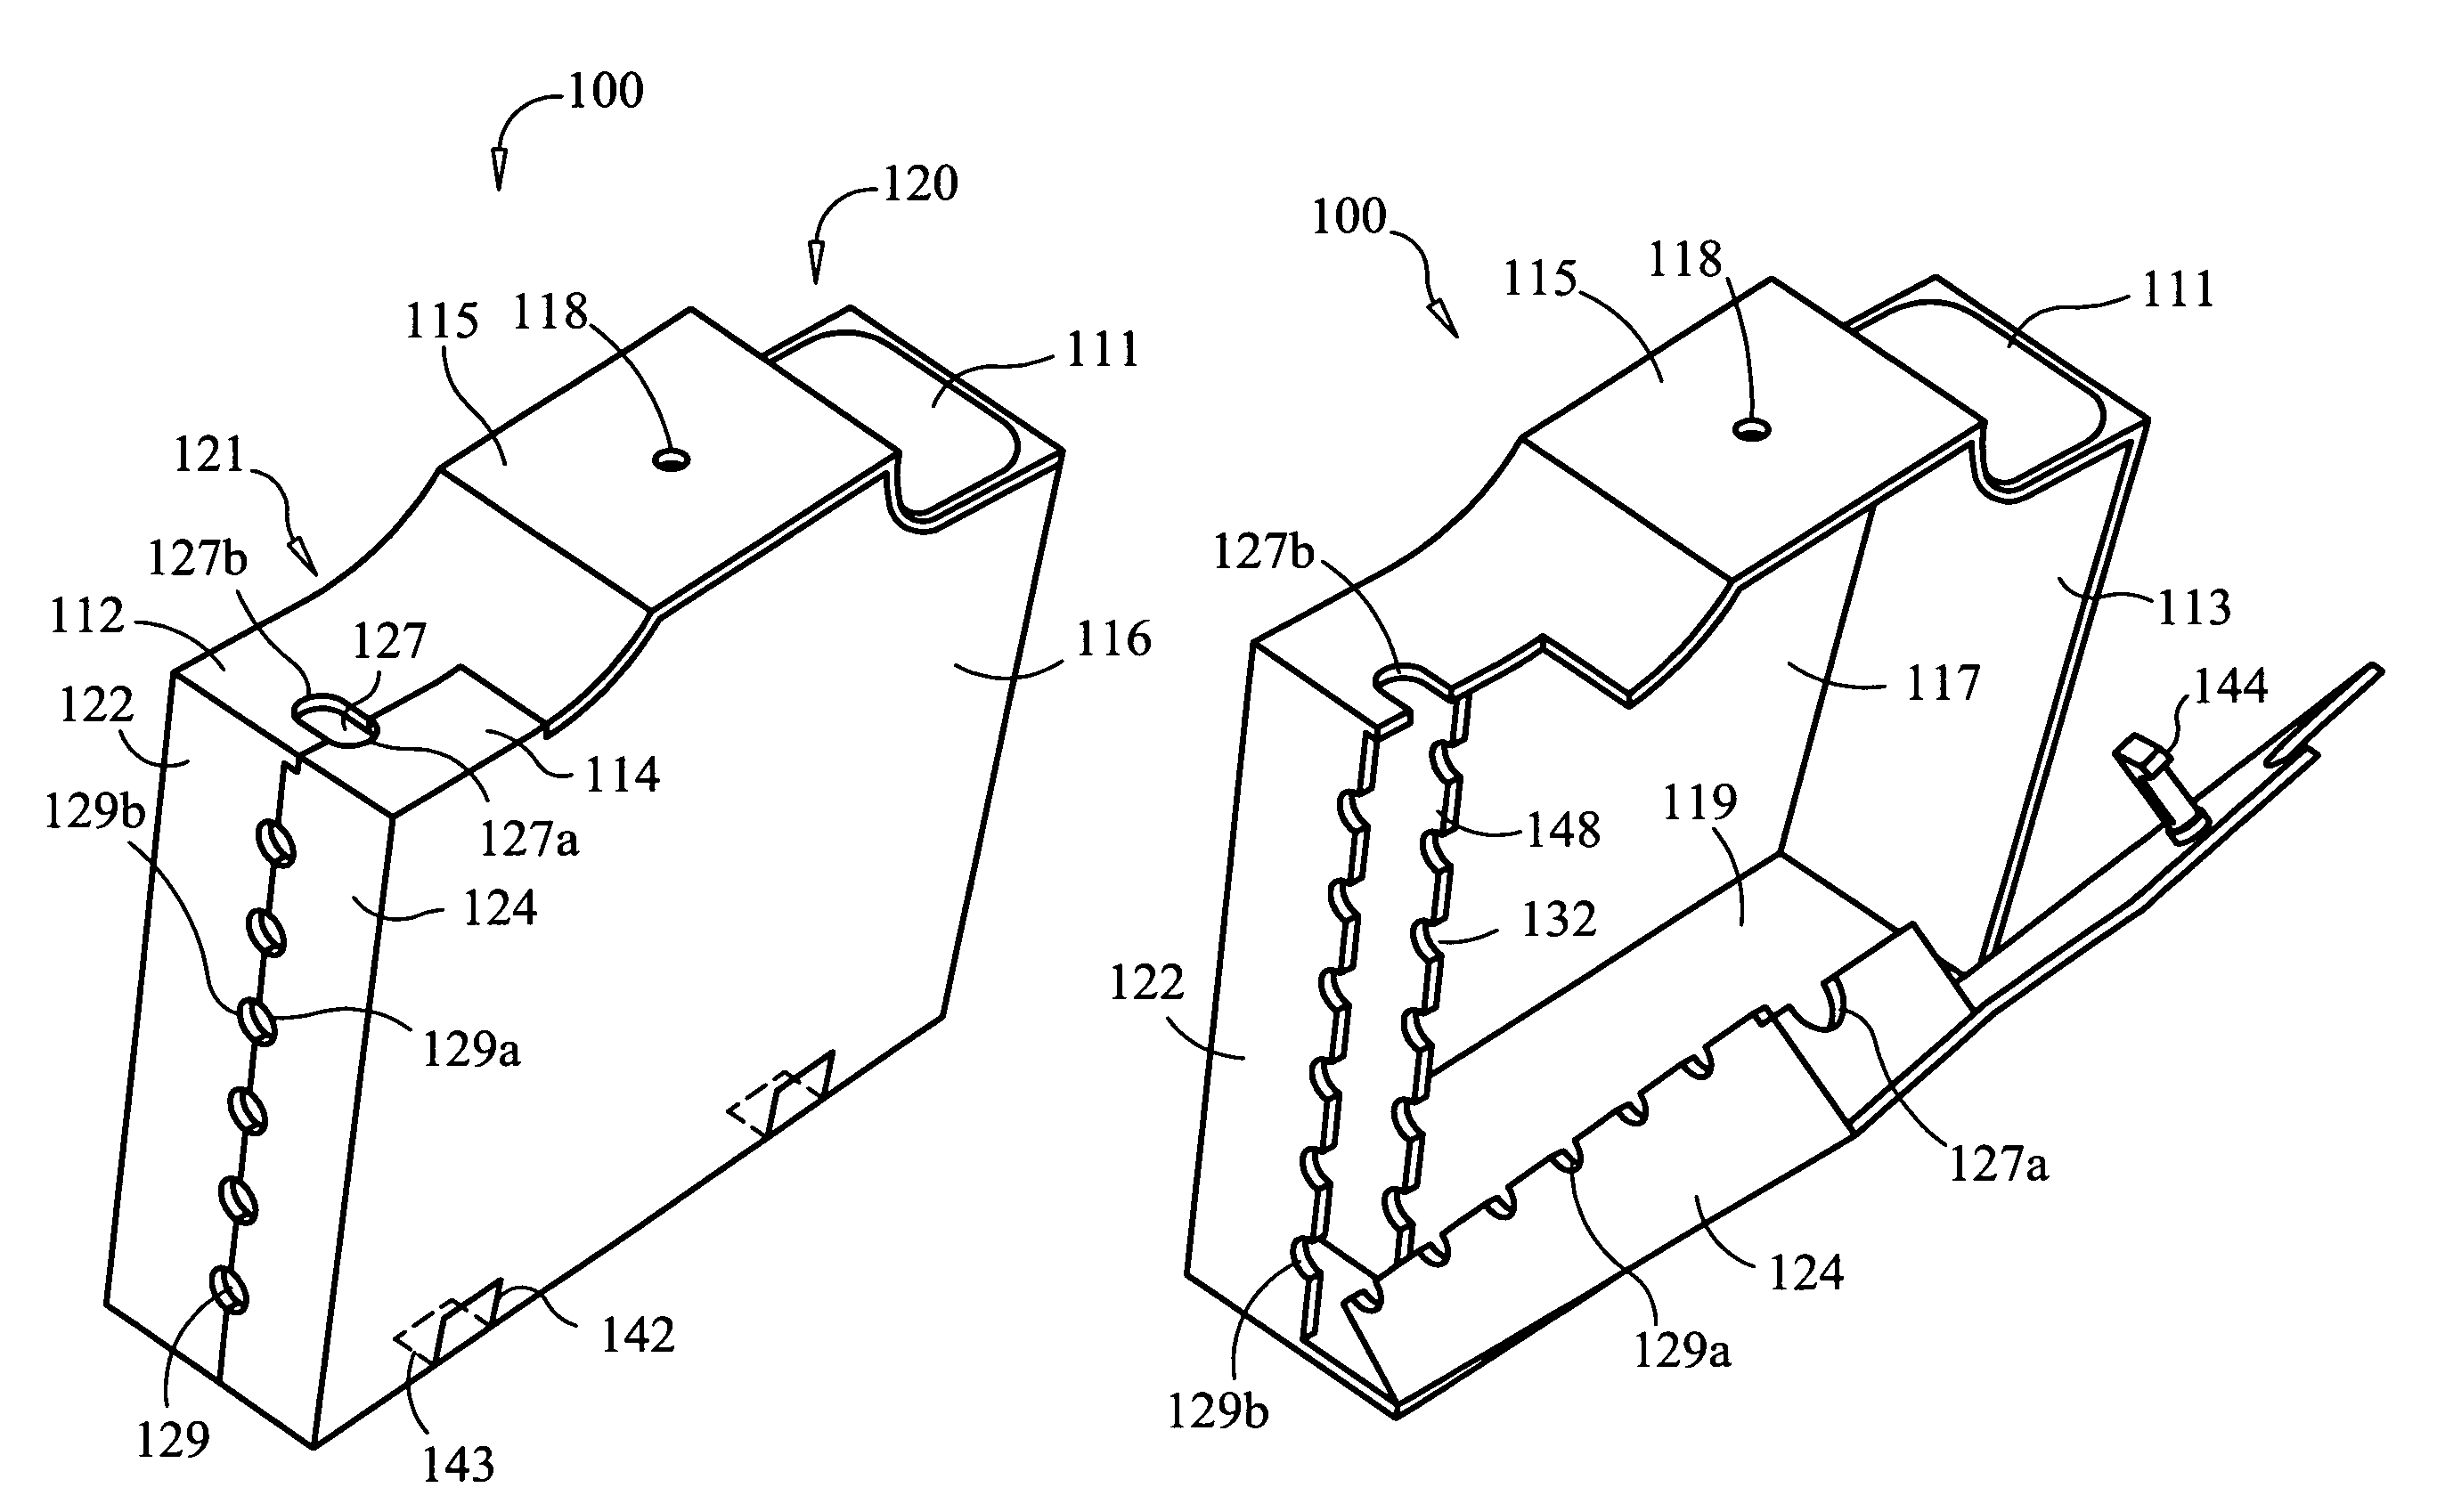 Electronic device charging platform and portable electrical outlet enclosure